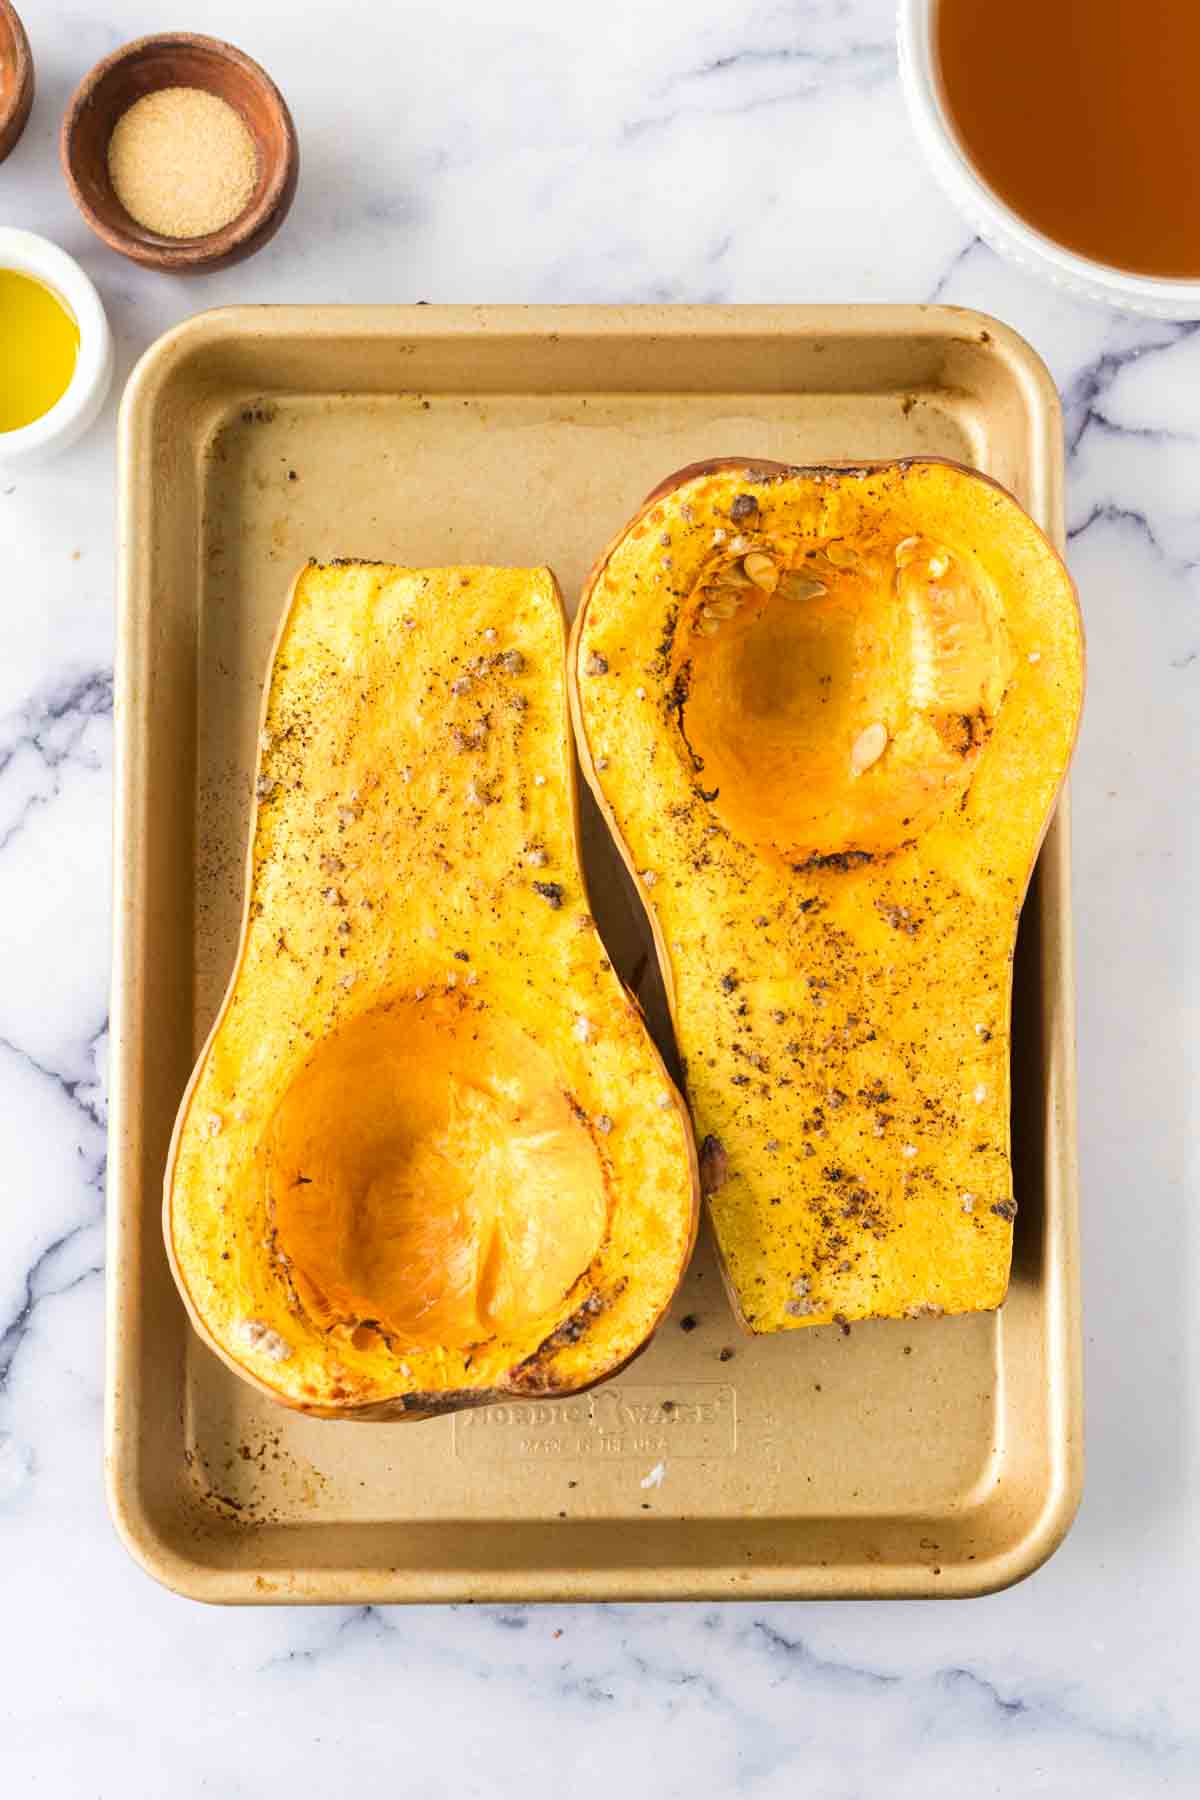 sliced and open face roasted butternut squash on a baking dish